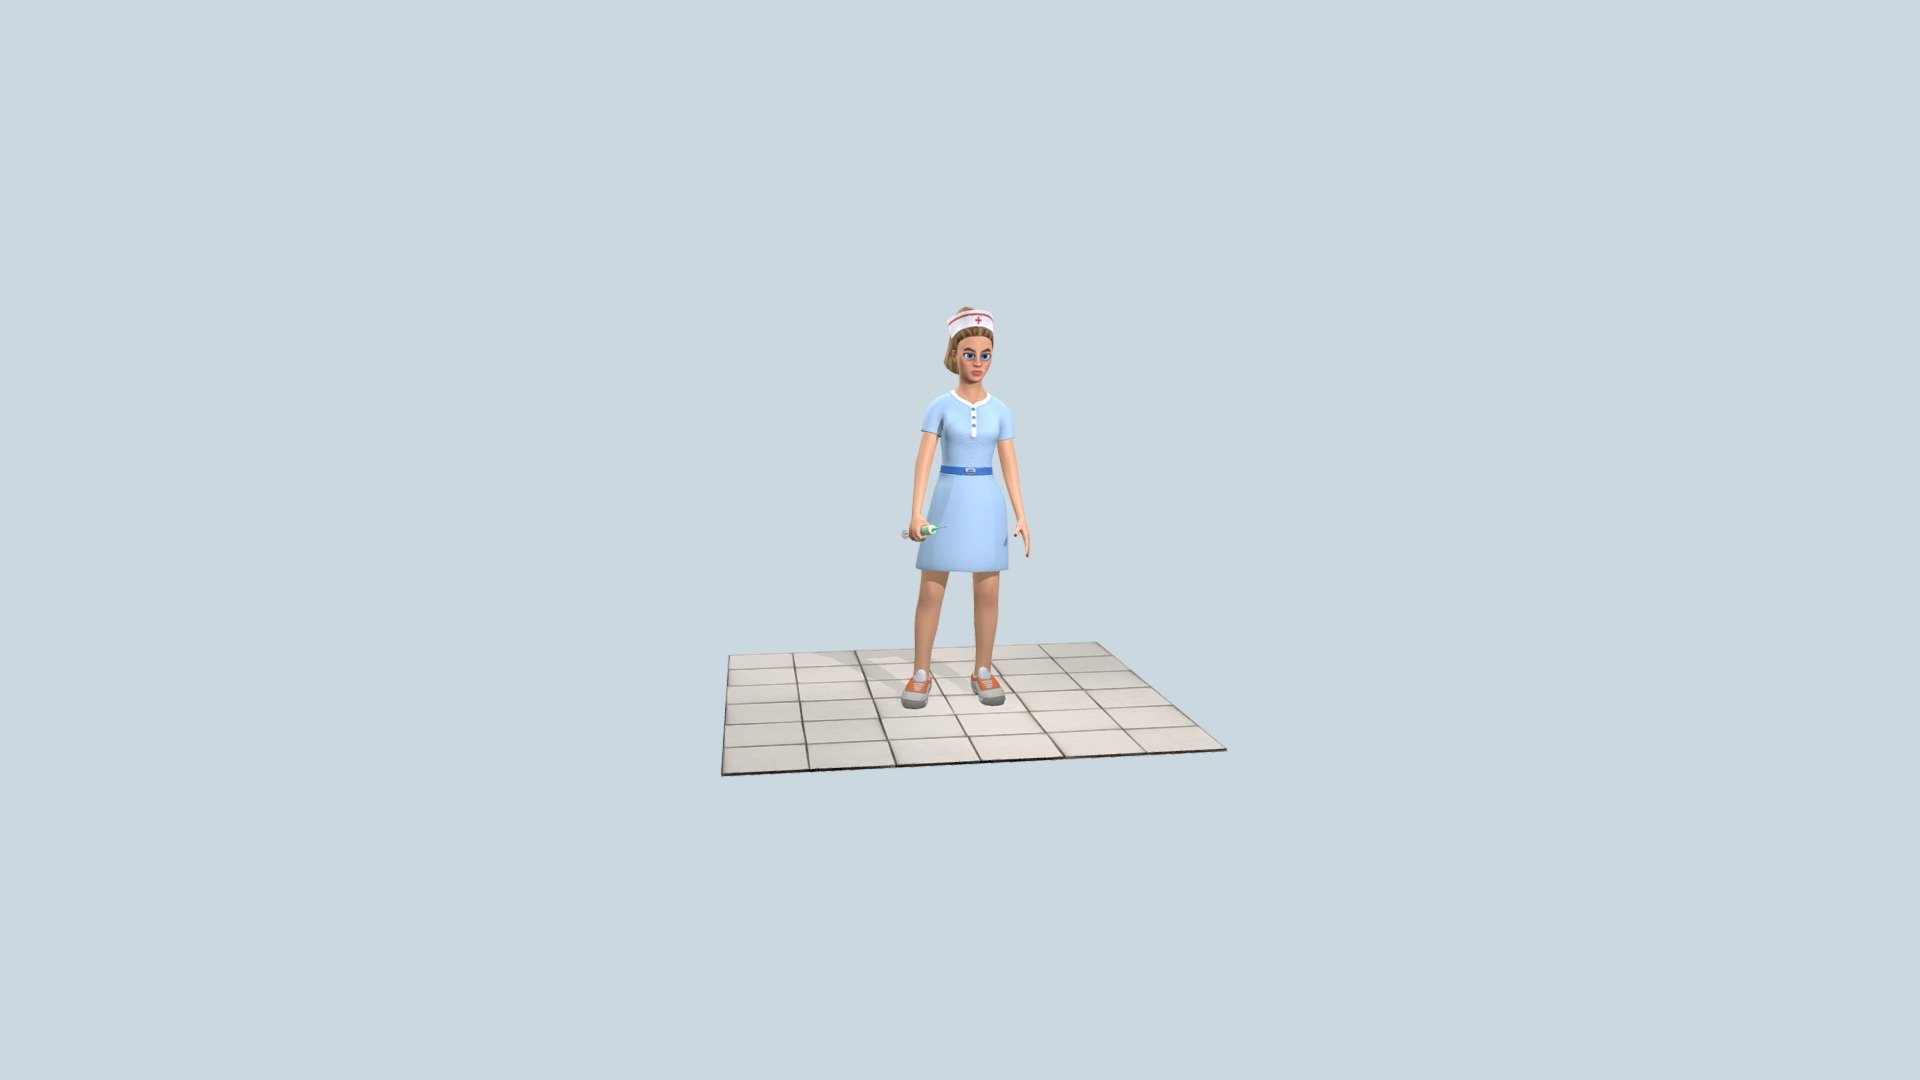 Cartoon low poly model of the nurse. Game-ready mesh with pbr textures, rigged and animated.

- only 3800 polygons.

- perfect for mobile and high definition games.

- rigged and skinned for your own animations with a clean and simple rig.

- 8 animations: action, walk, idle right, idle left, idle break left, idle break right, syringe examine, syringe toss.   

- up to 4096 x 4096 PBR textures.

- also included the syringe high-quality game model with textures.

- and bonus: seamless material for the tile floor.

- original Blender file included 3d model